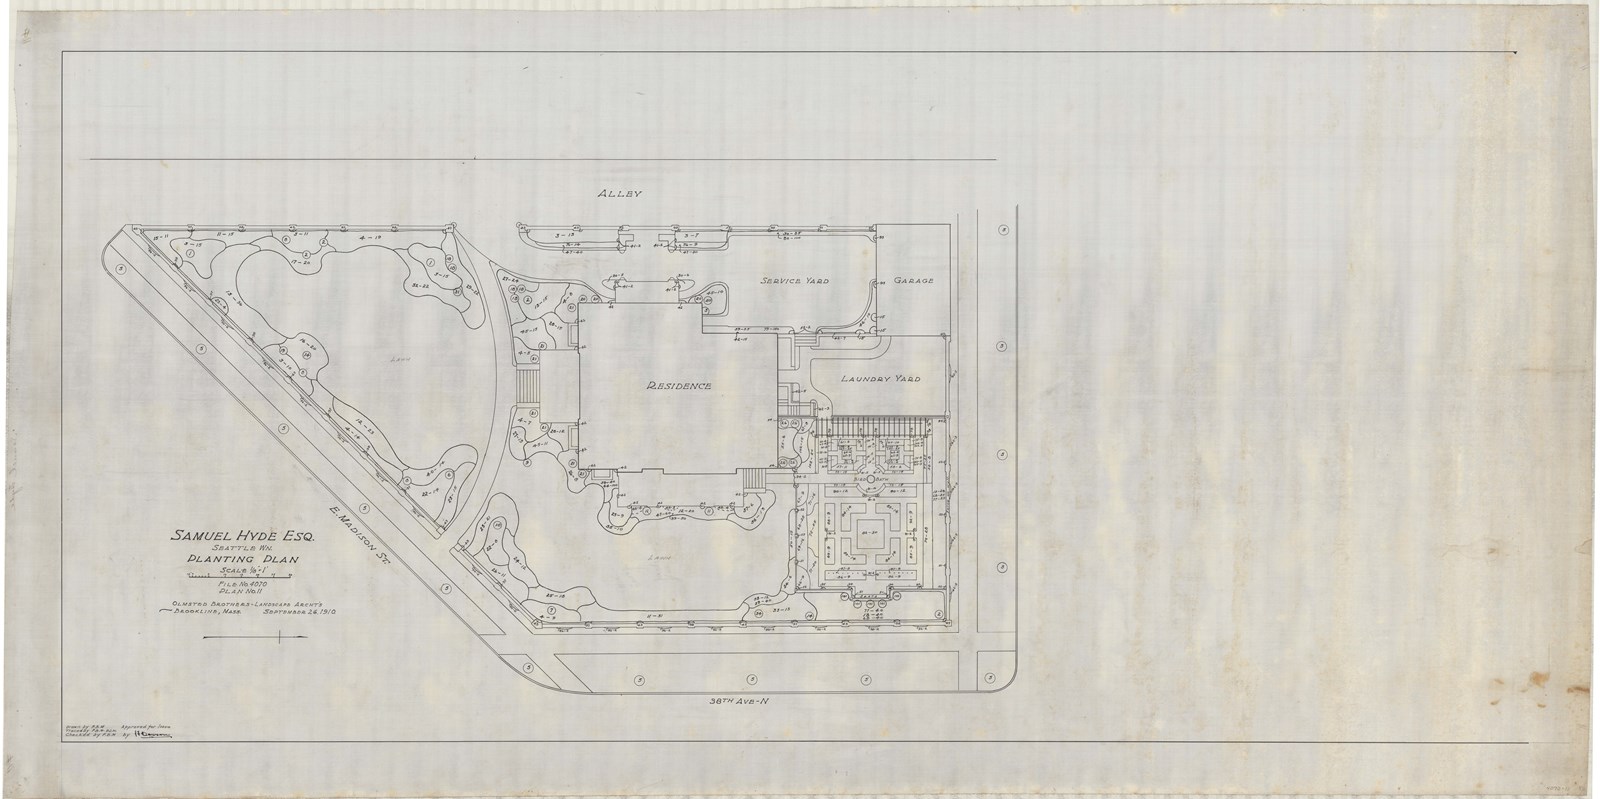 Pencil plan of estate with several buildings, open space with trees along edges and garden